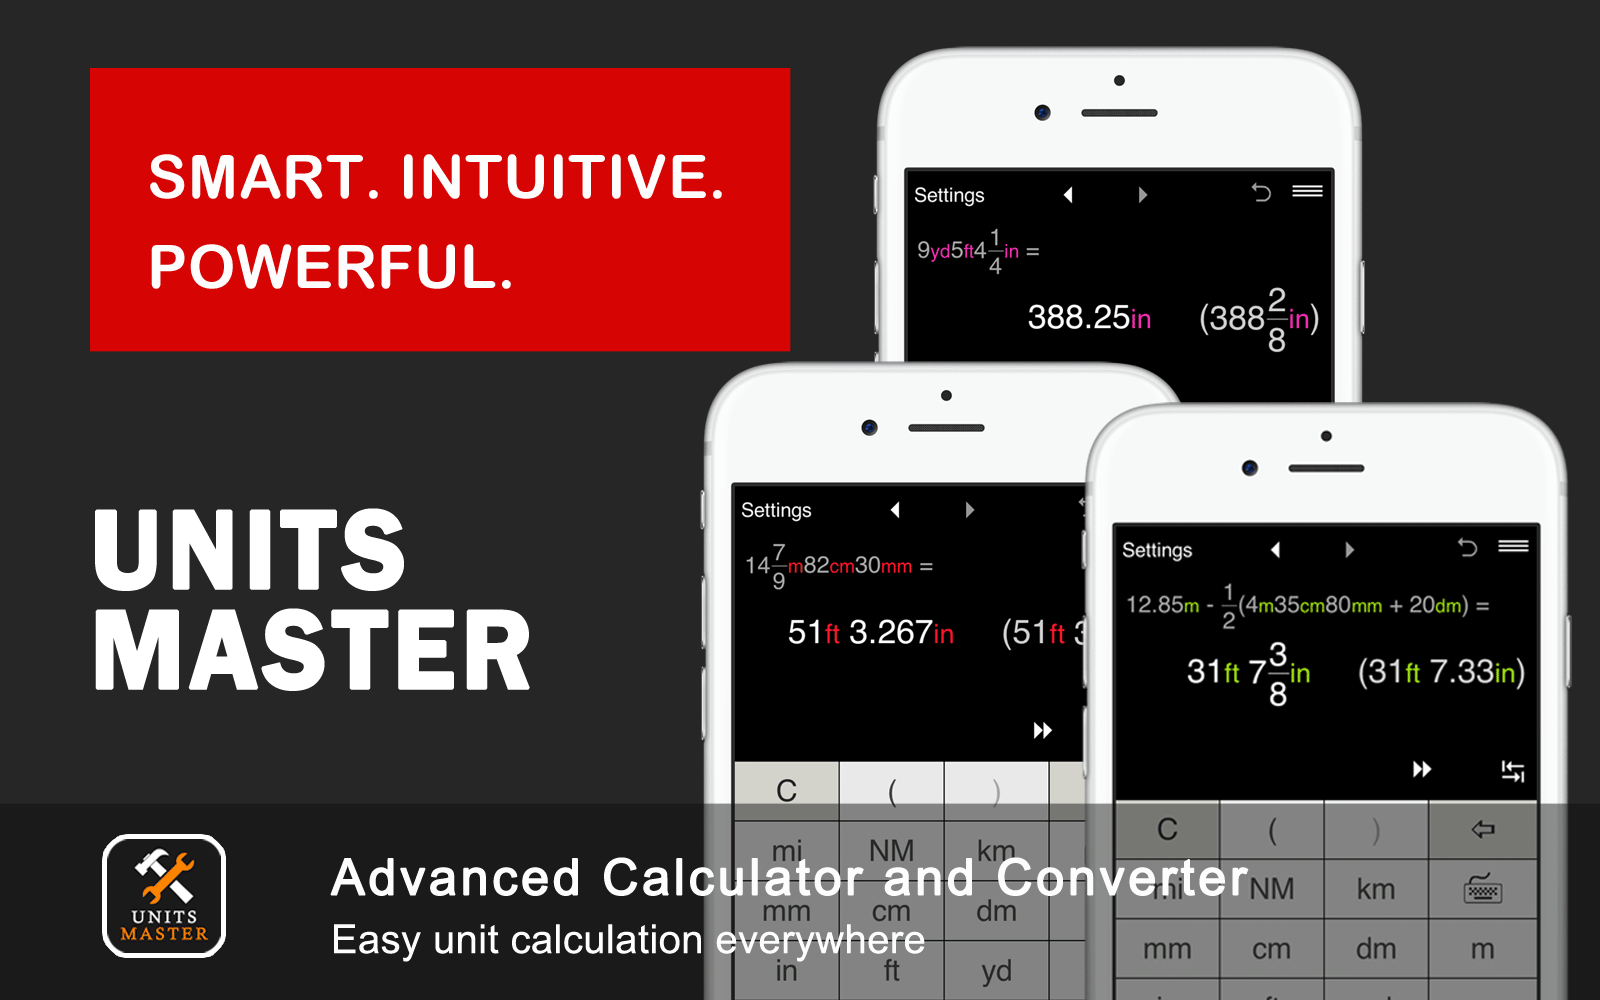 Unit Calculator and Converter for everyday calculations